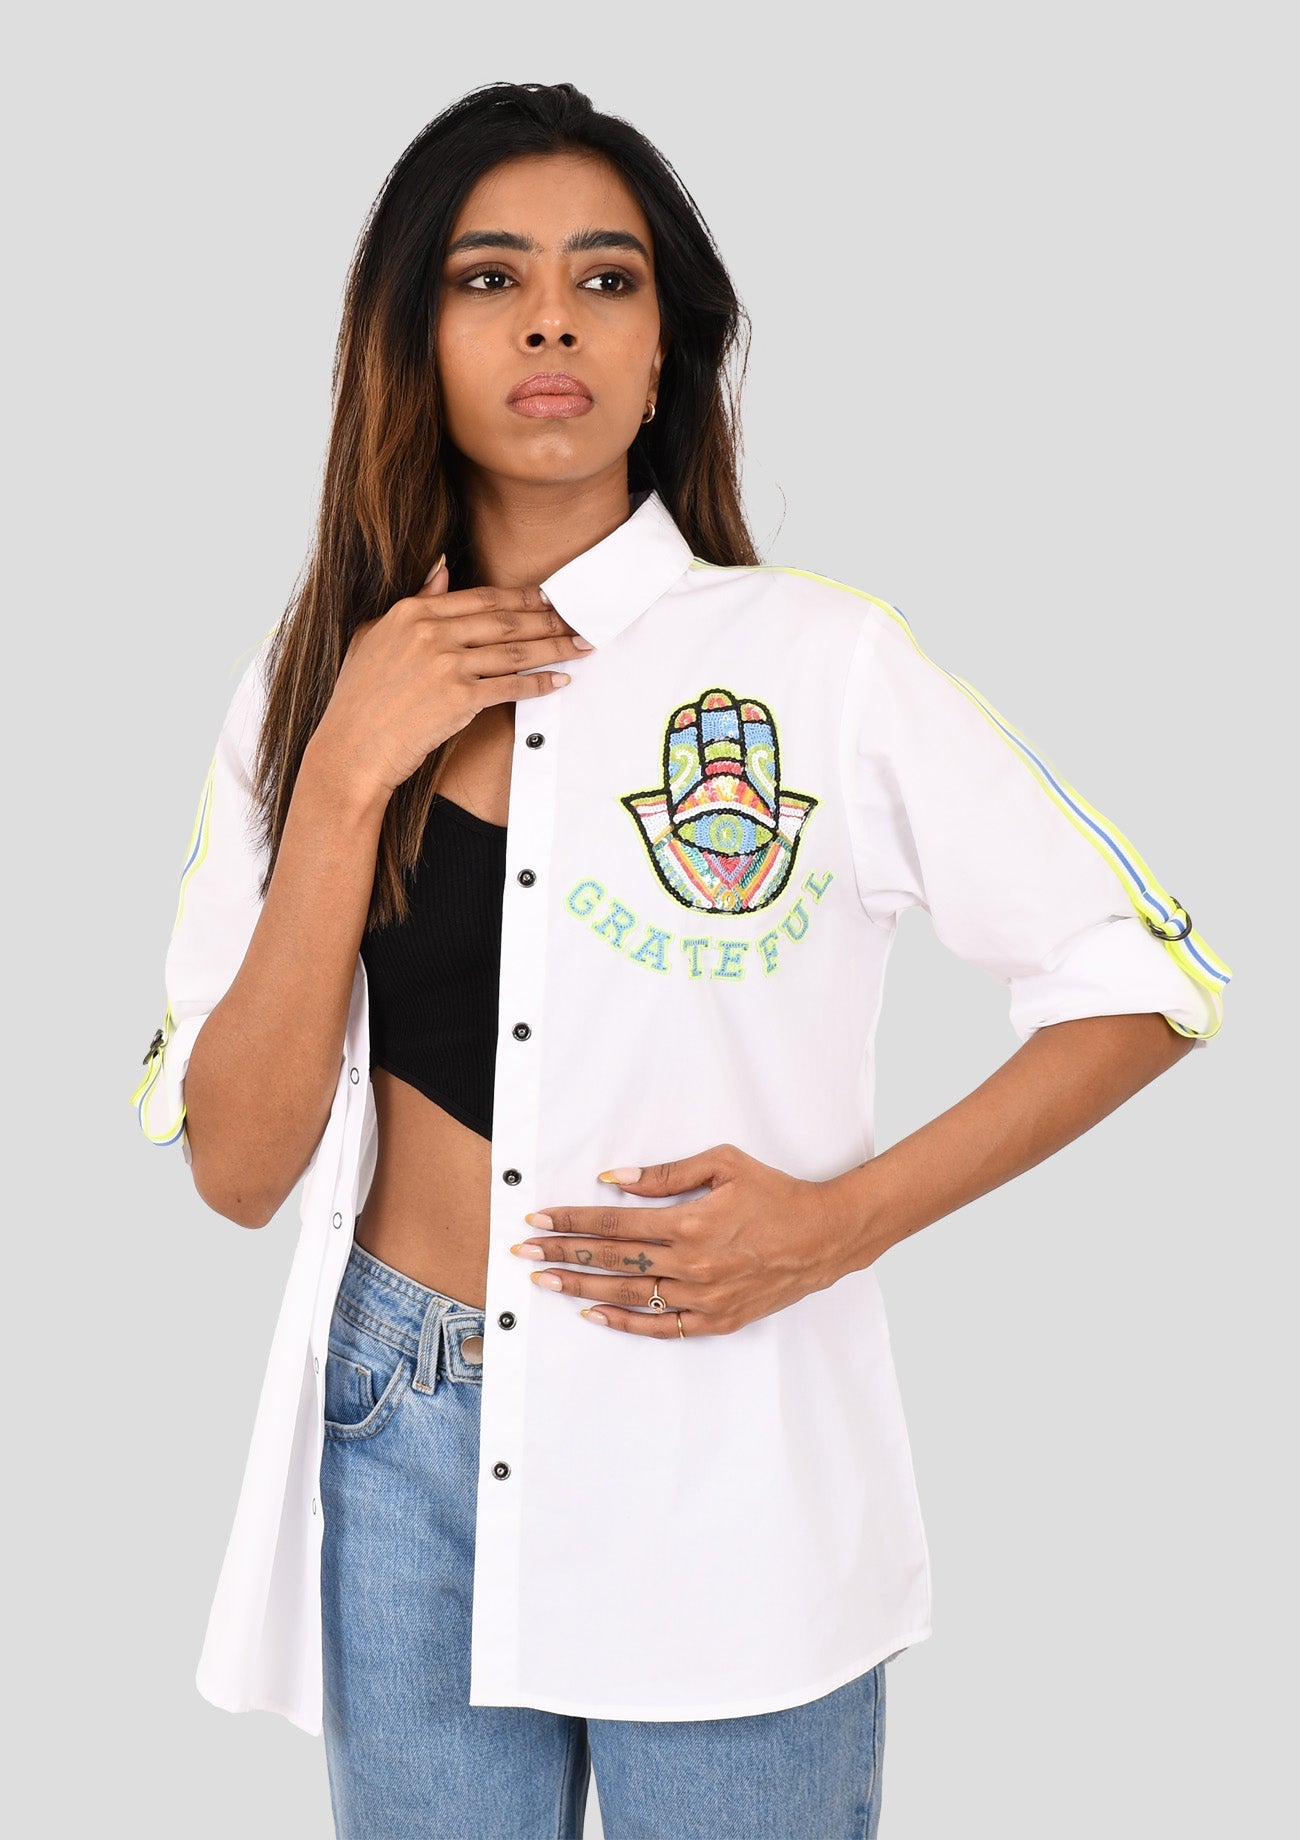 White Cotton Shirt With Embroidered Hamsa Hand And "Grateful " With Stripe Tape